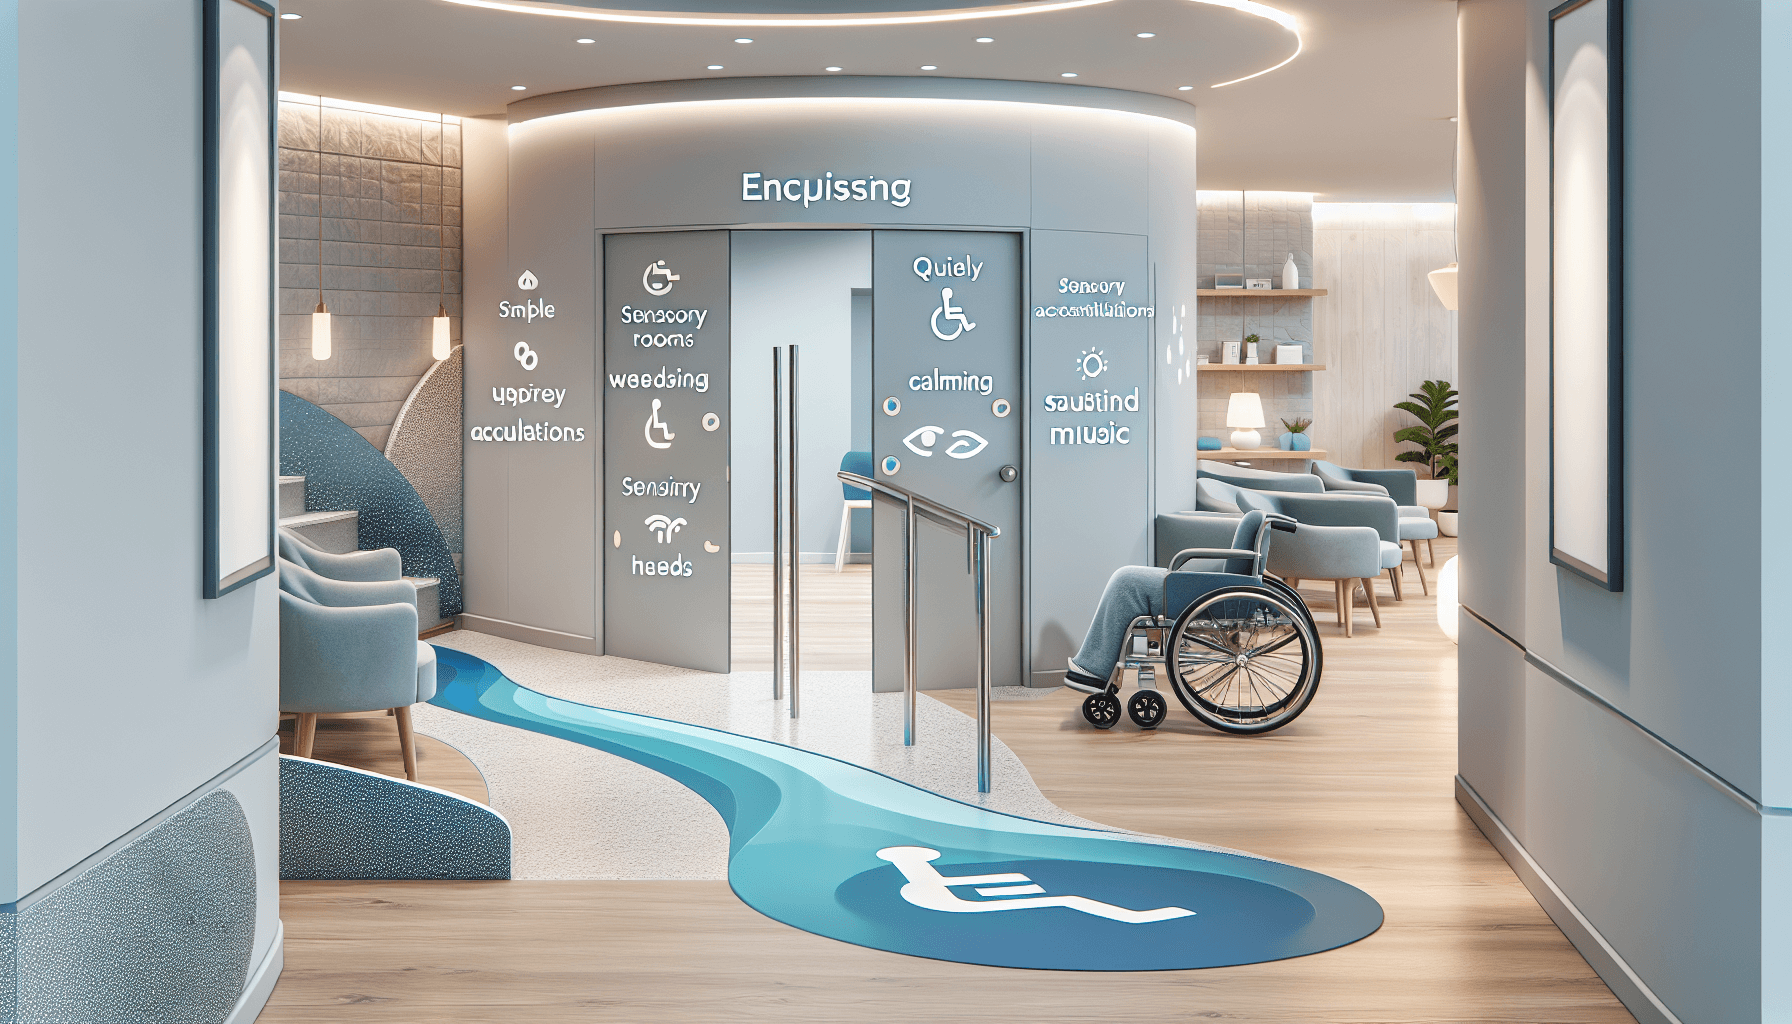 Illustration of a wheelchair-accessible dental office with sensory accommodations